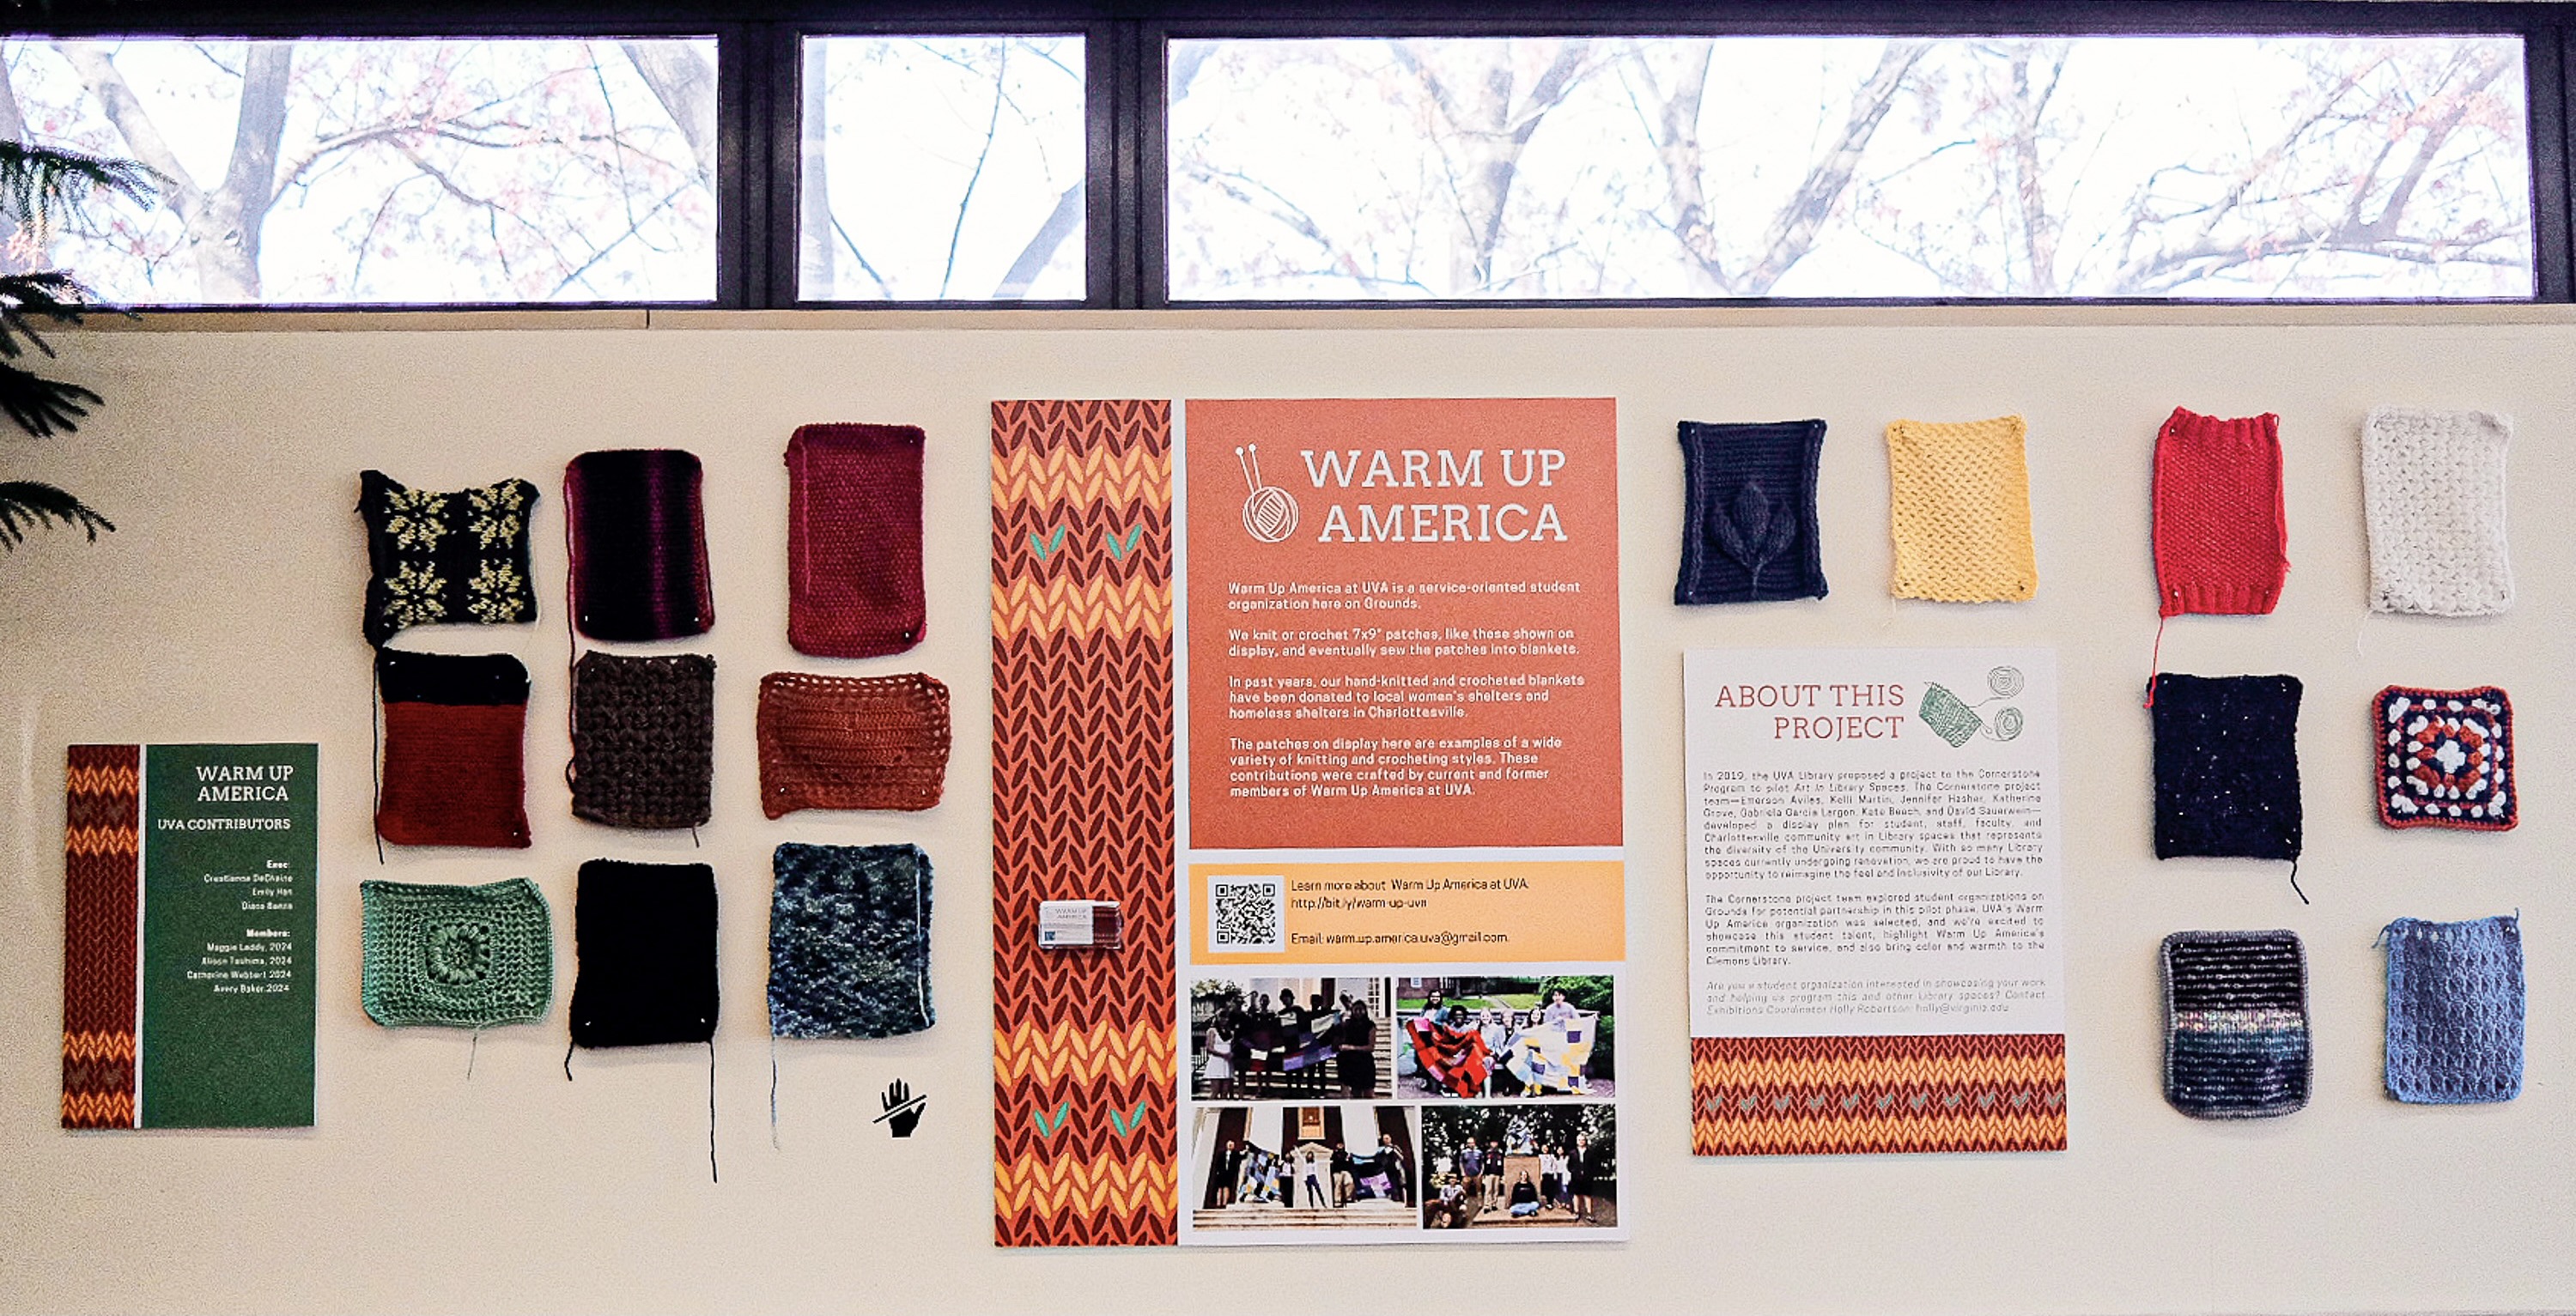 Warm Up America Art in Library Spaces Exhibition